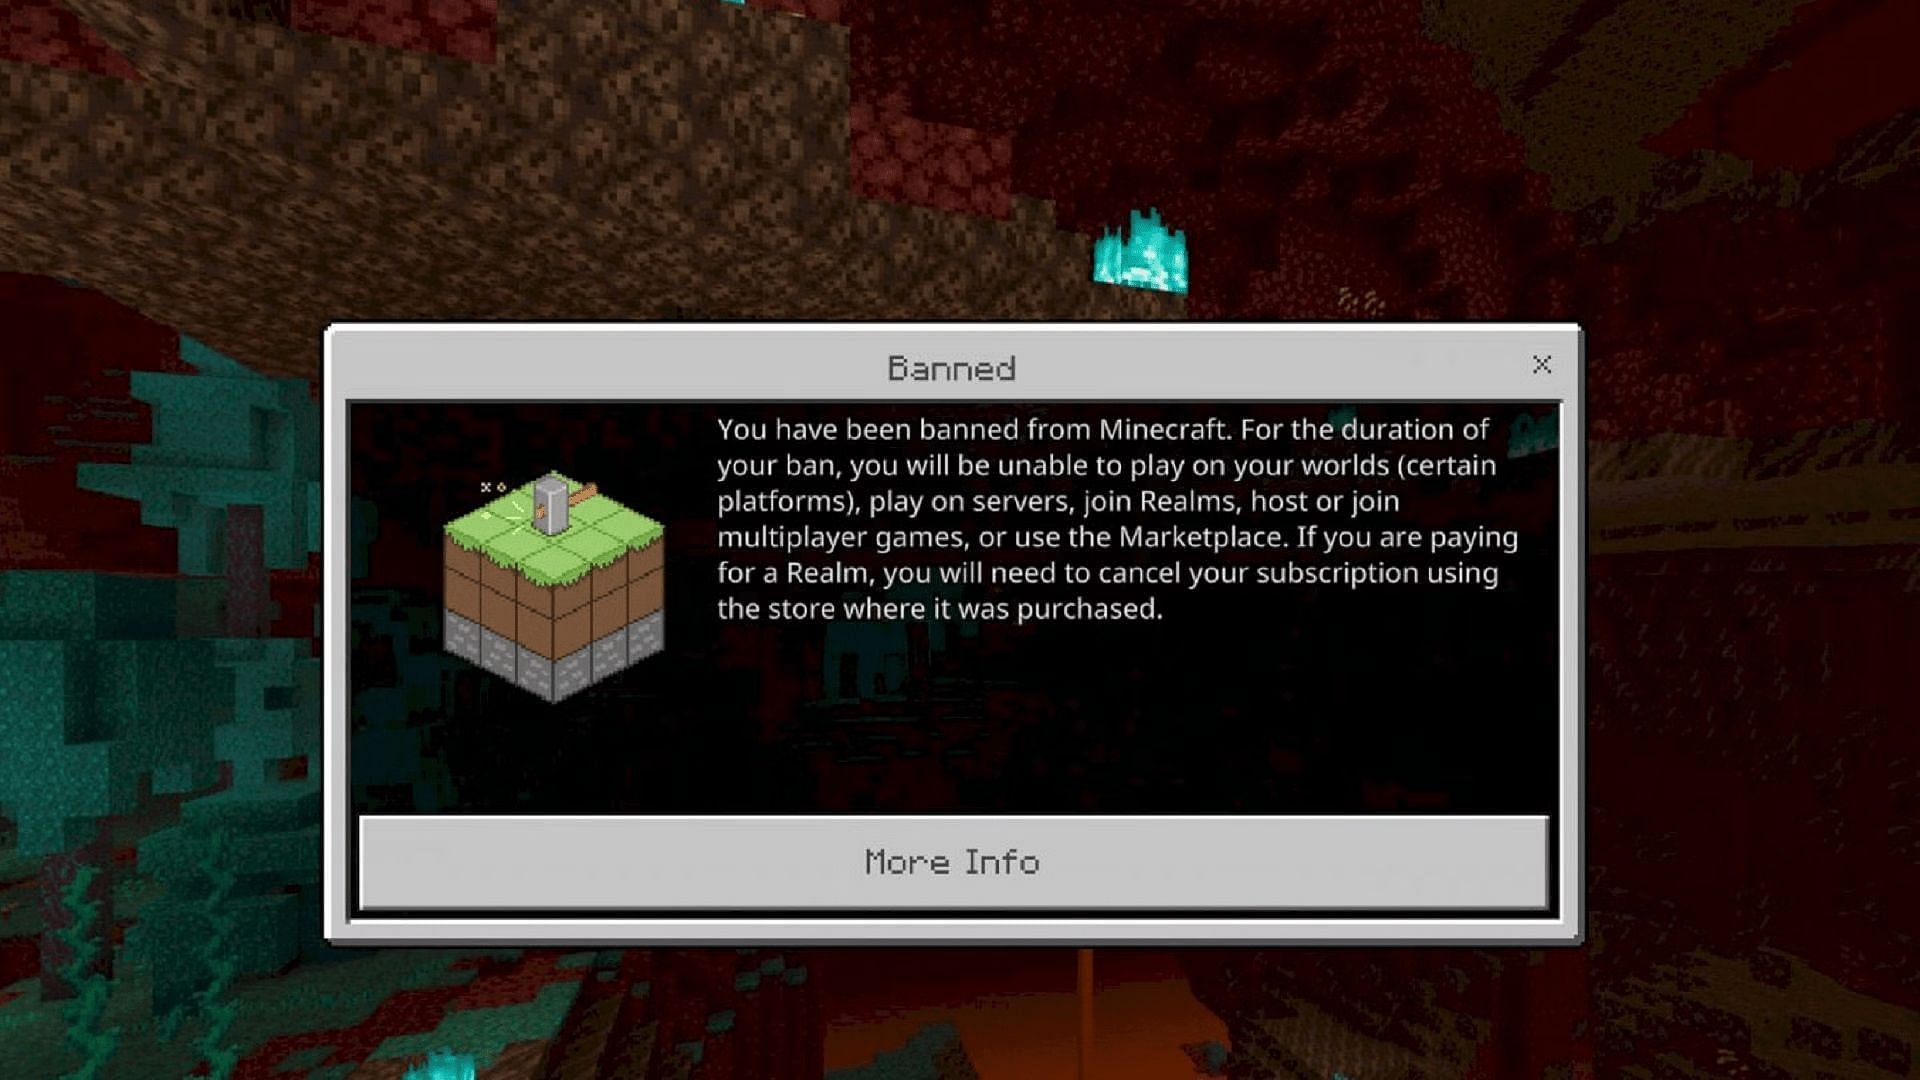 How to unban someone in Minecraft